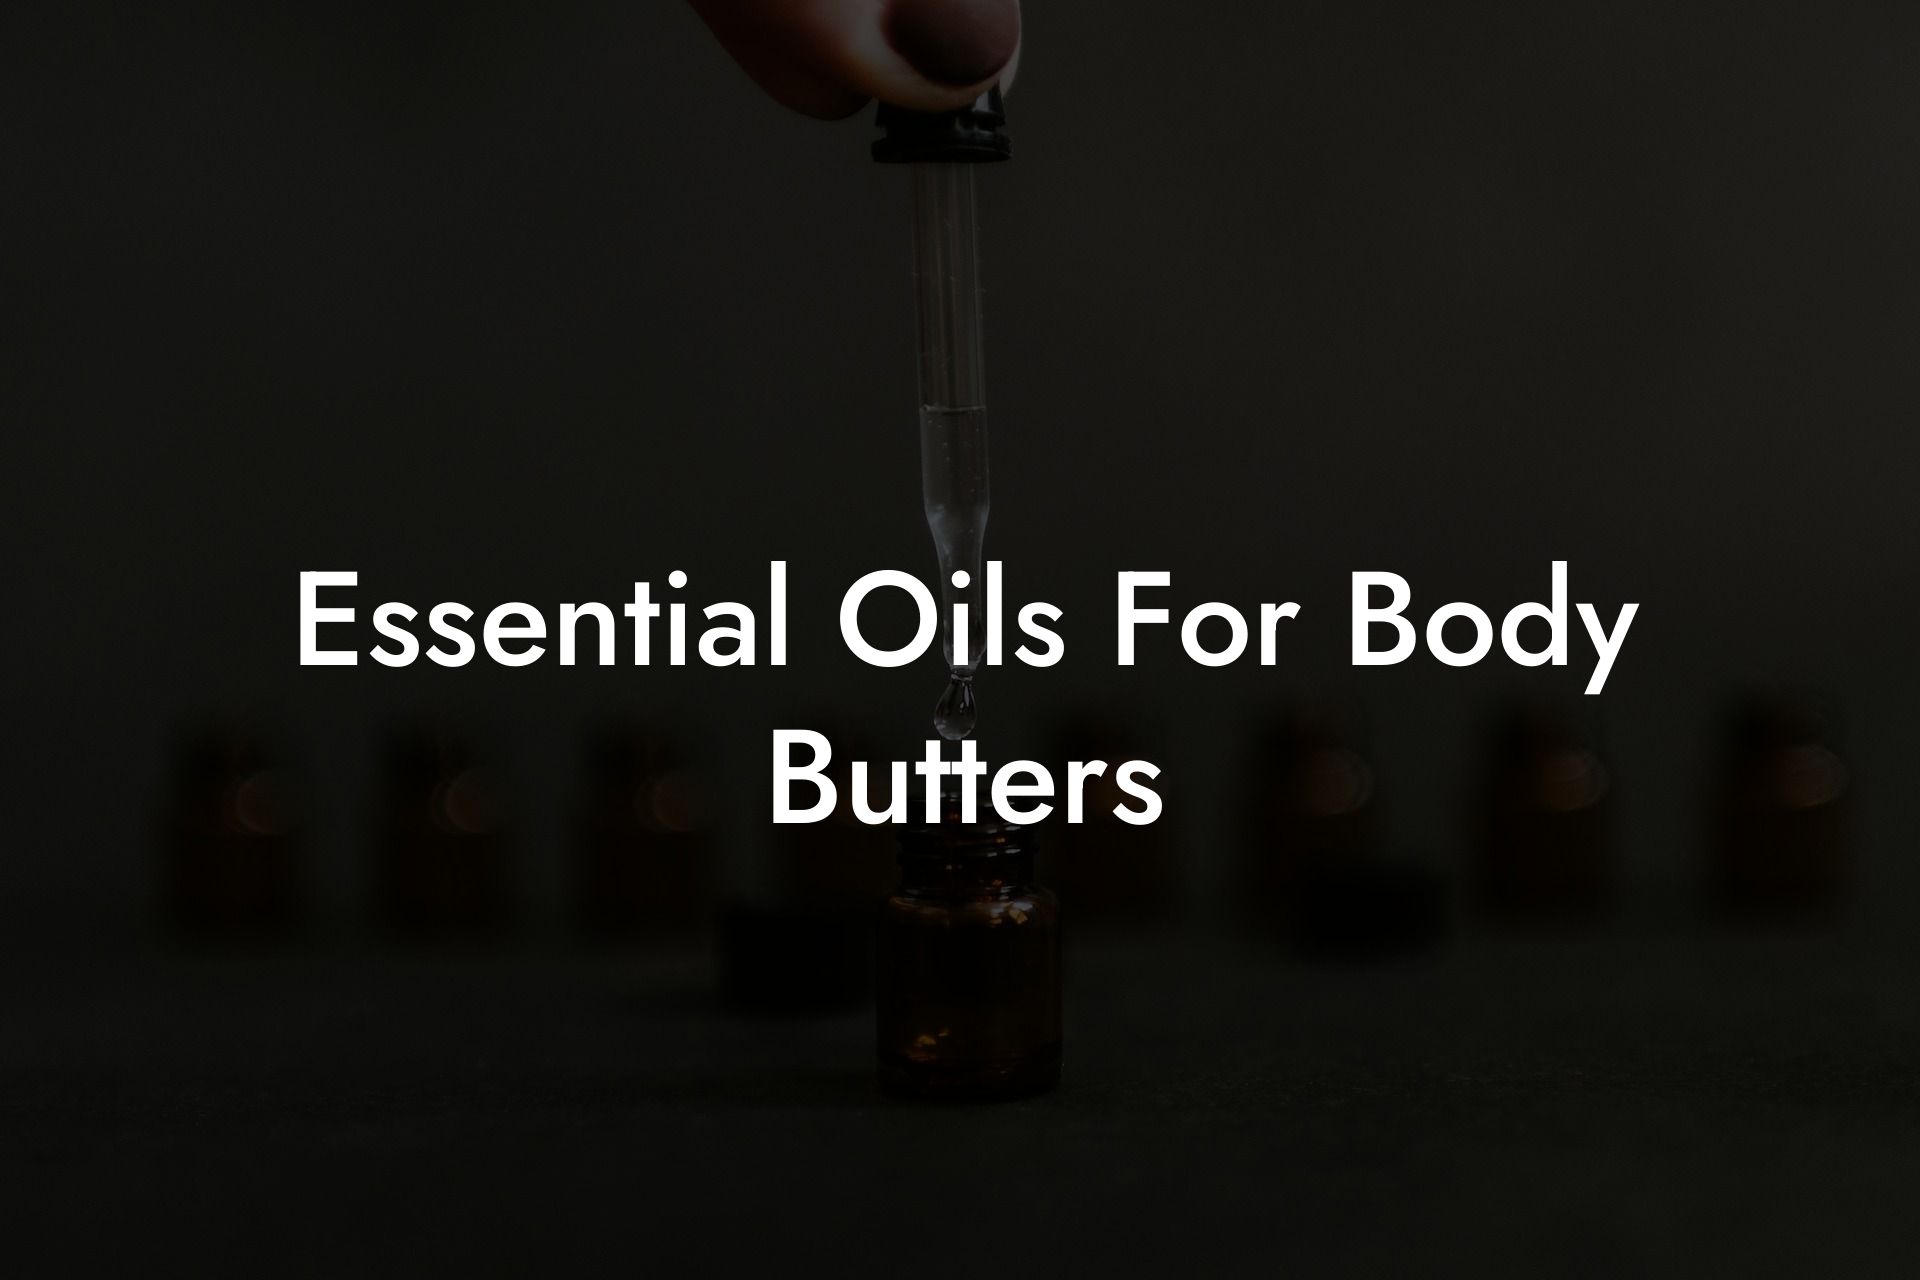 Essential Oils For Body Butters